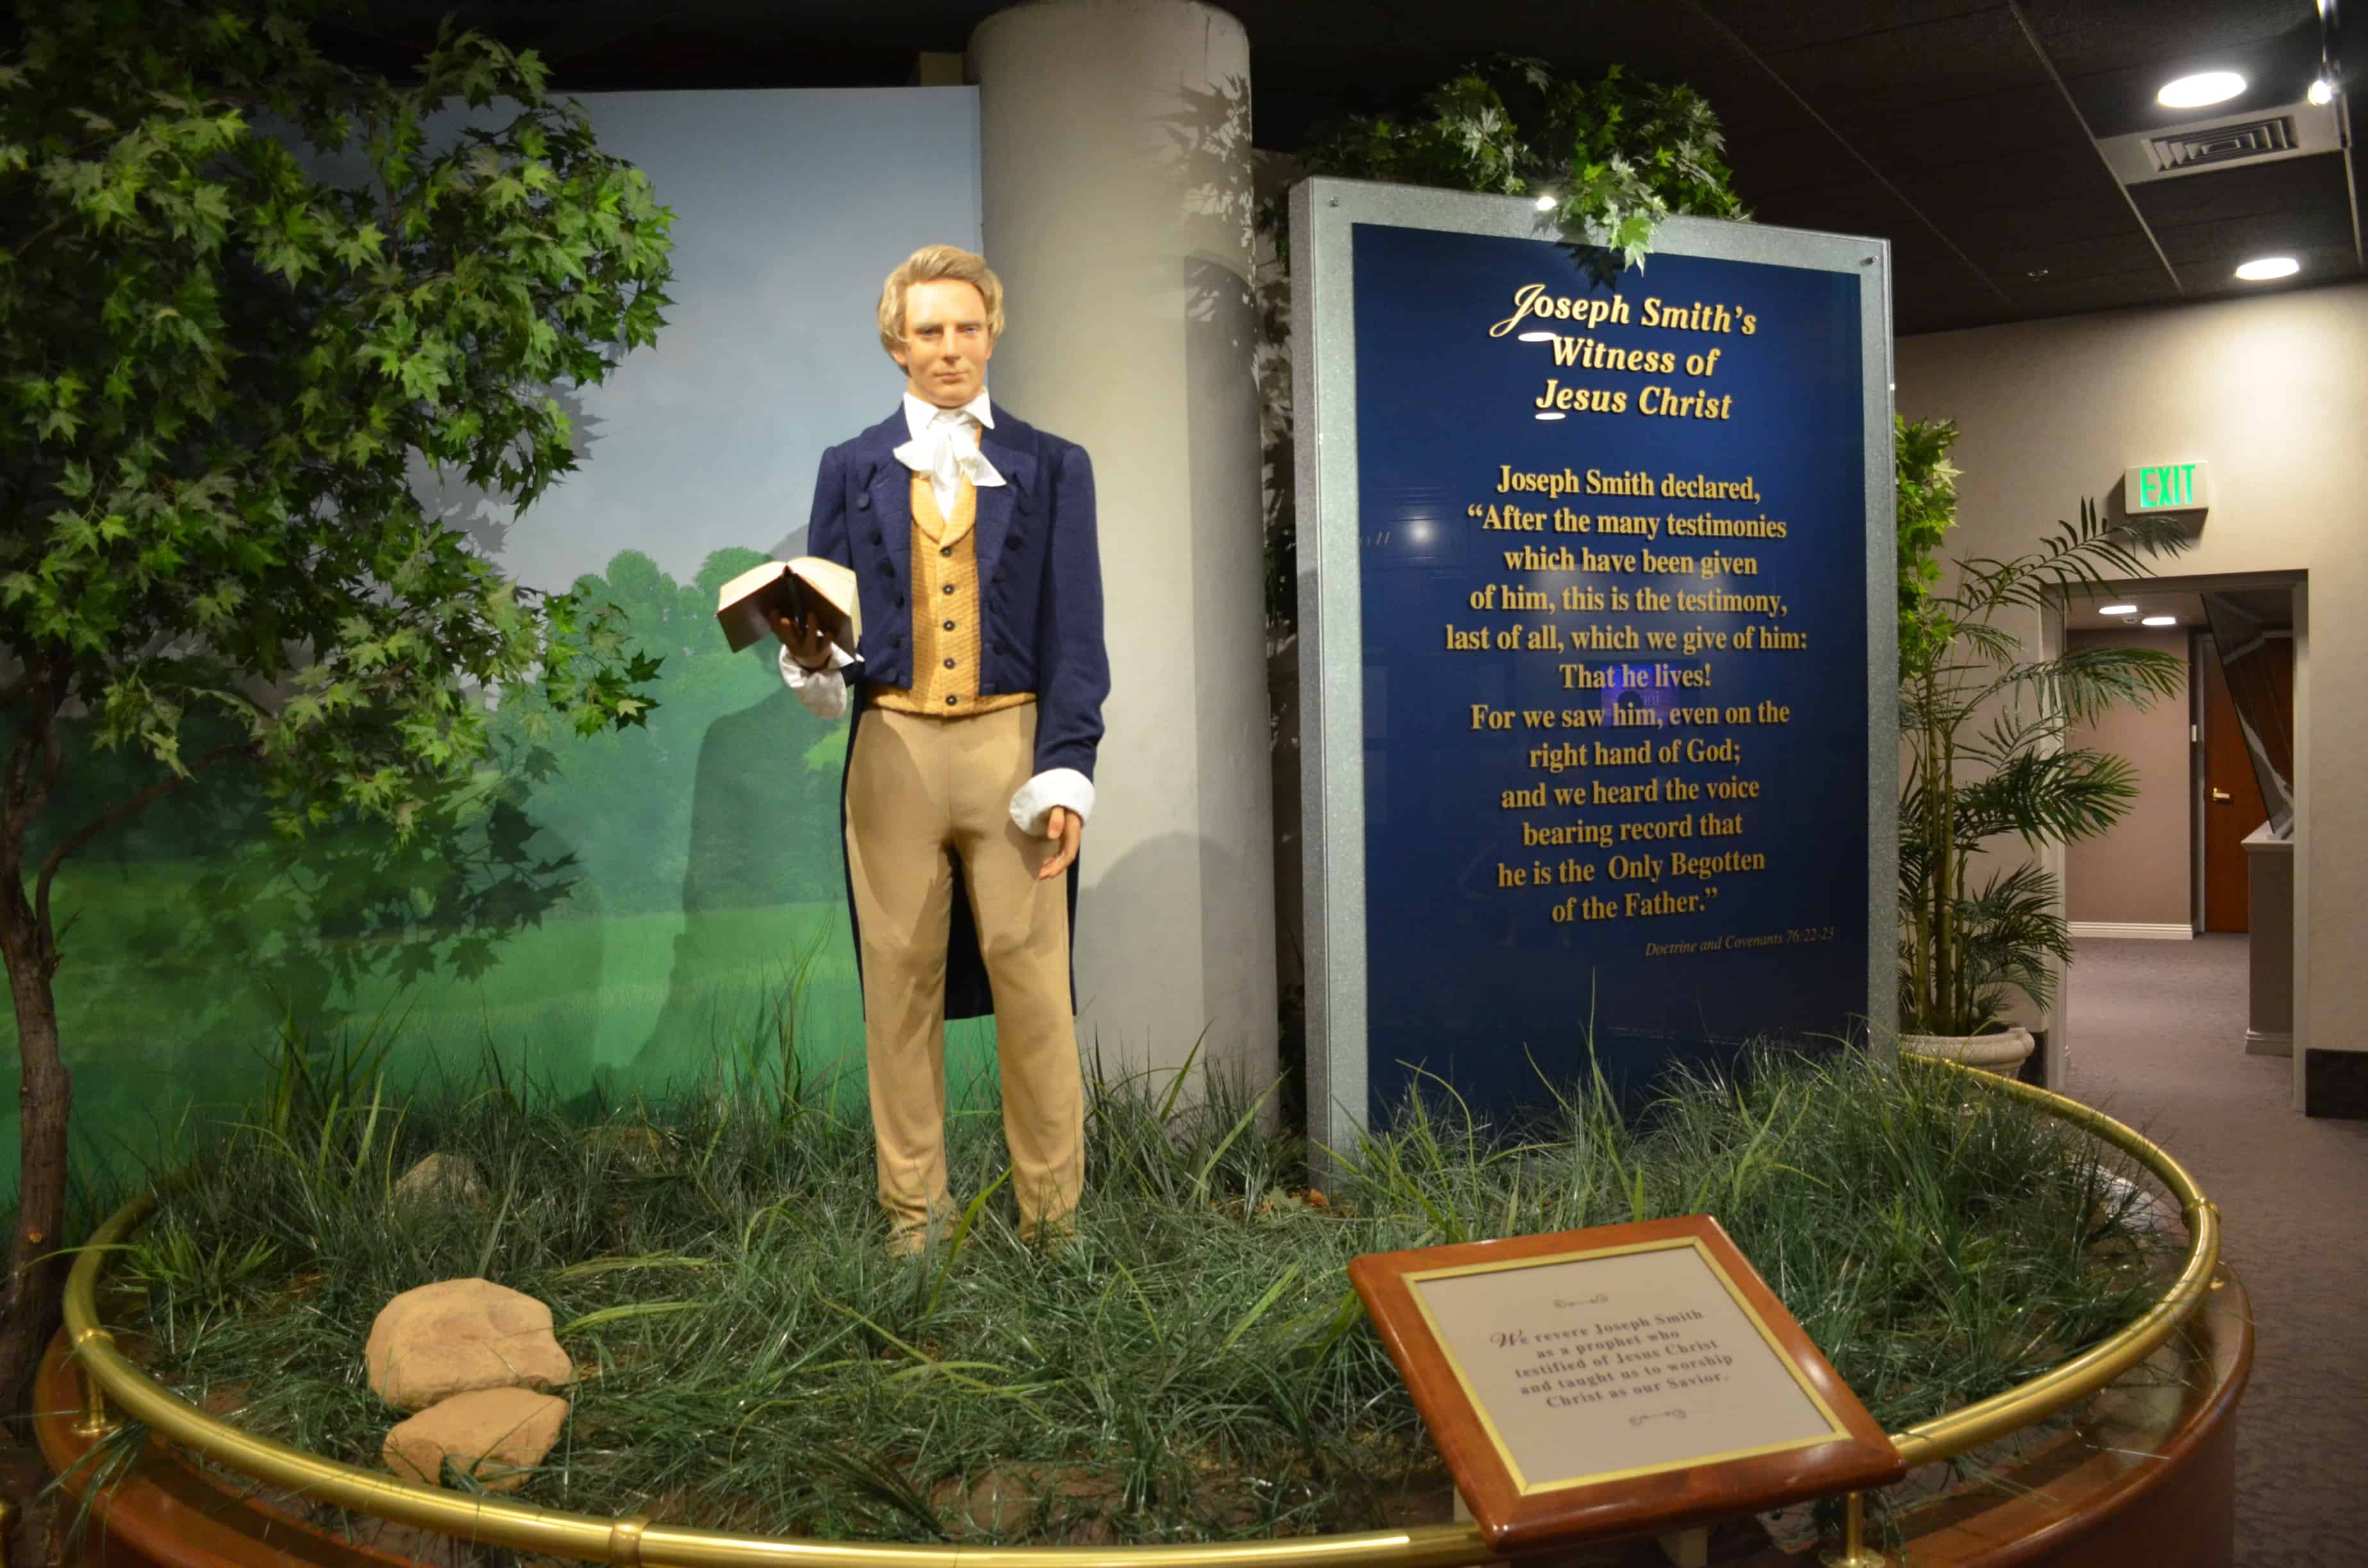 Joseph Smith in the prophets exhibit in the North Visitors' Center at Temple Square in Salt Lake City, Utah